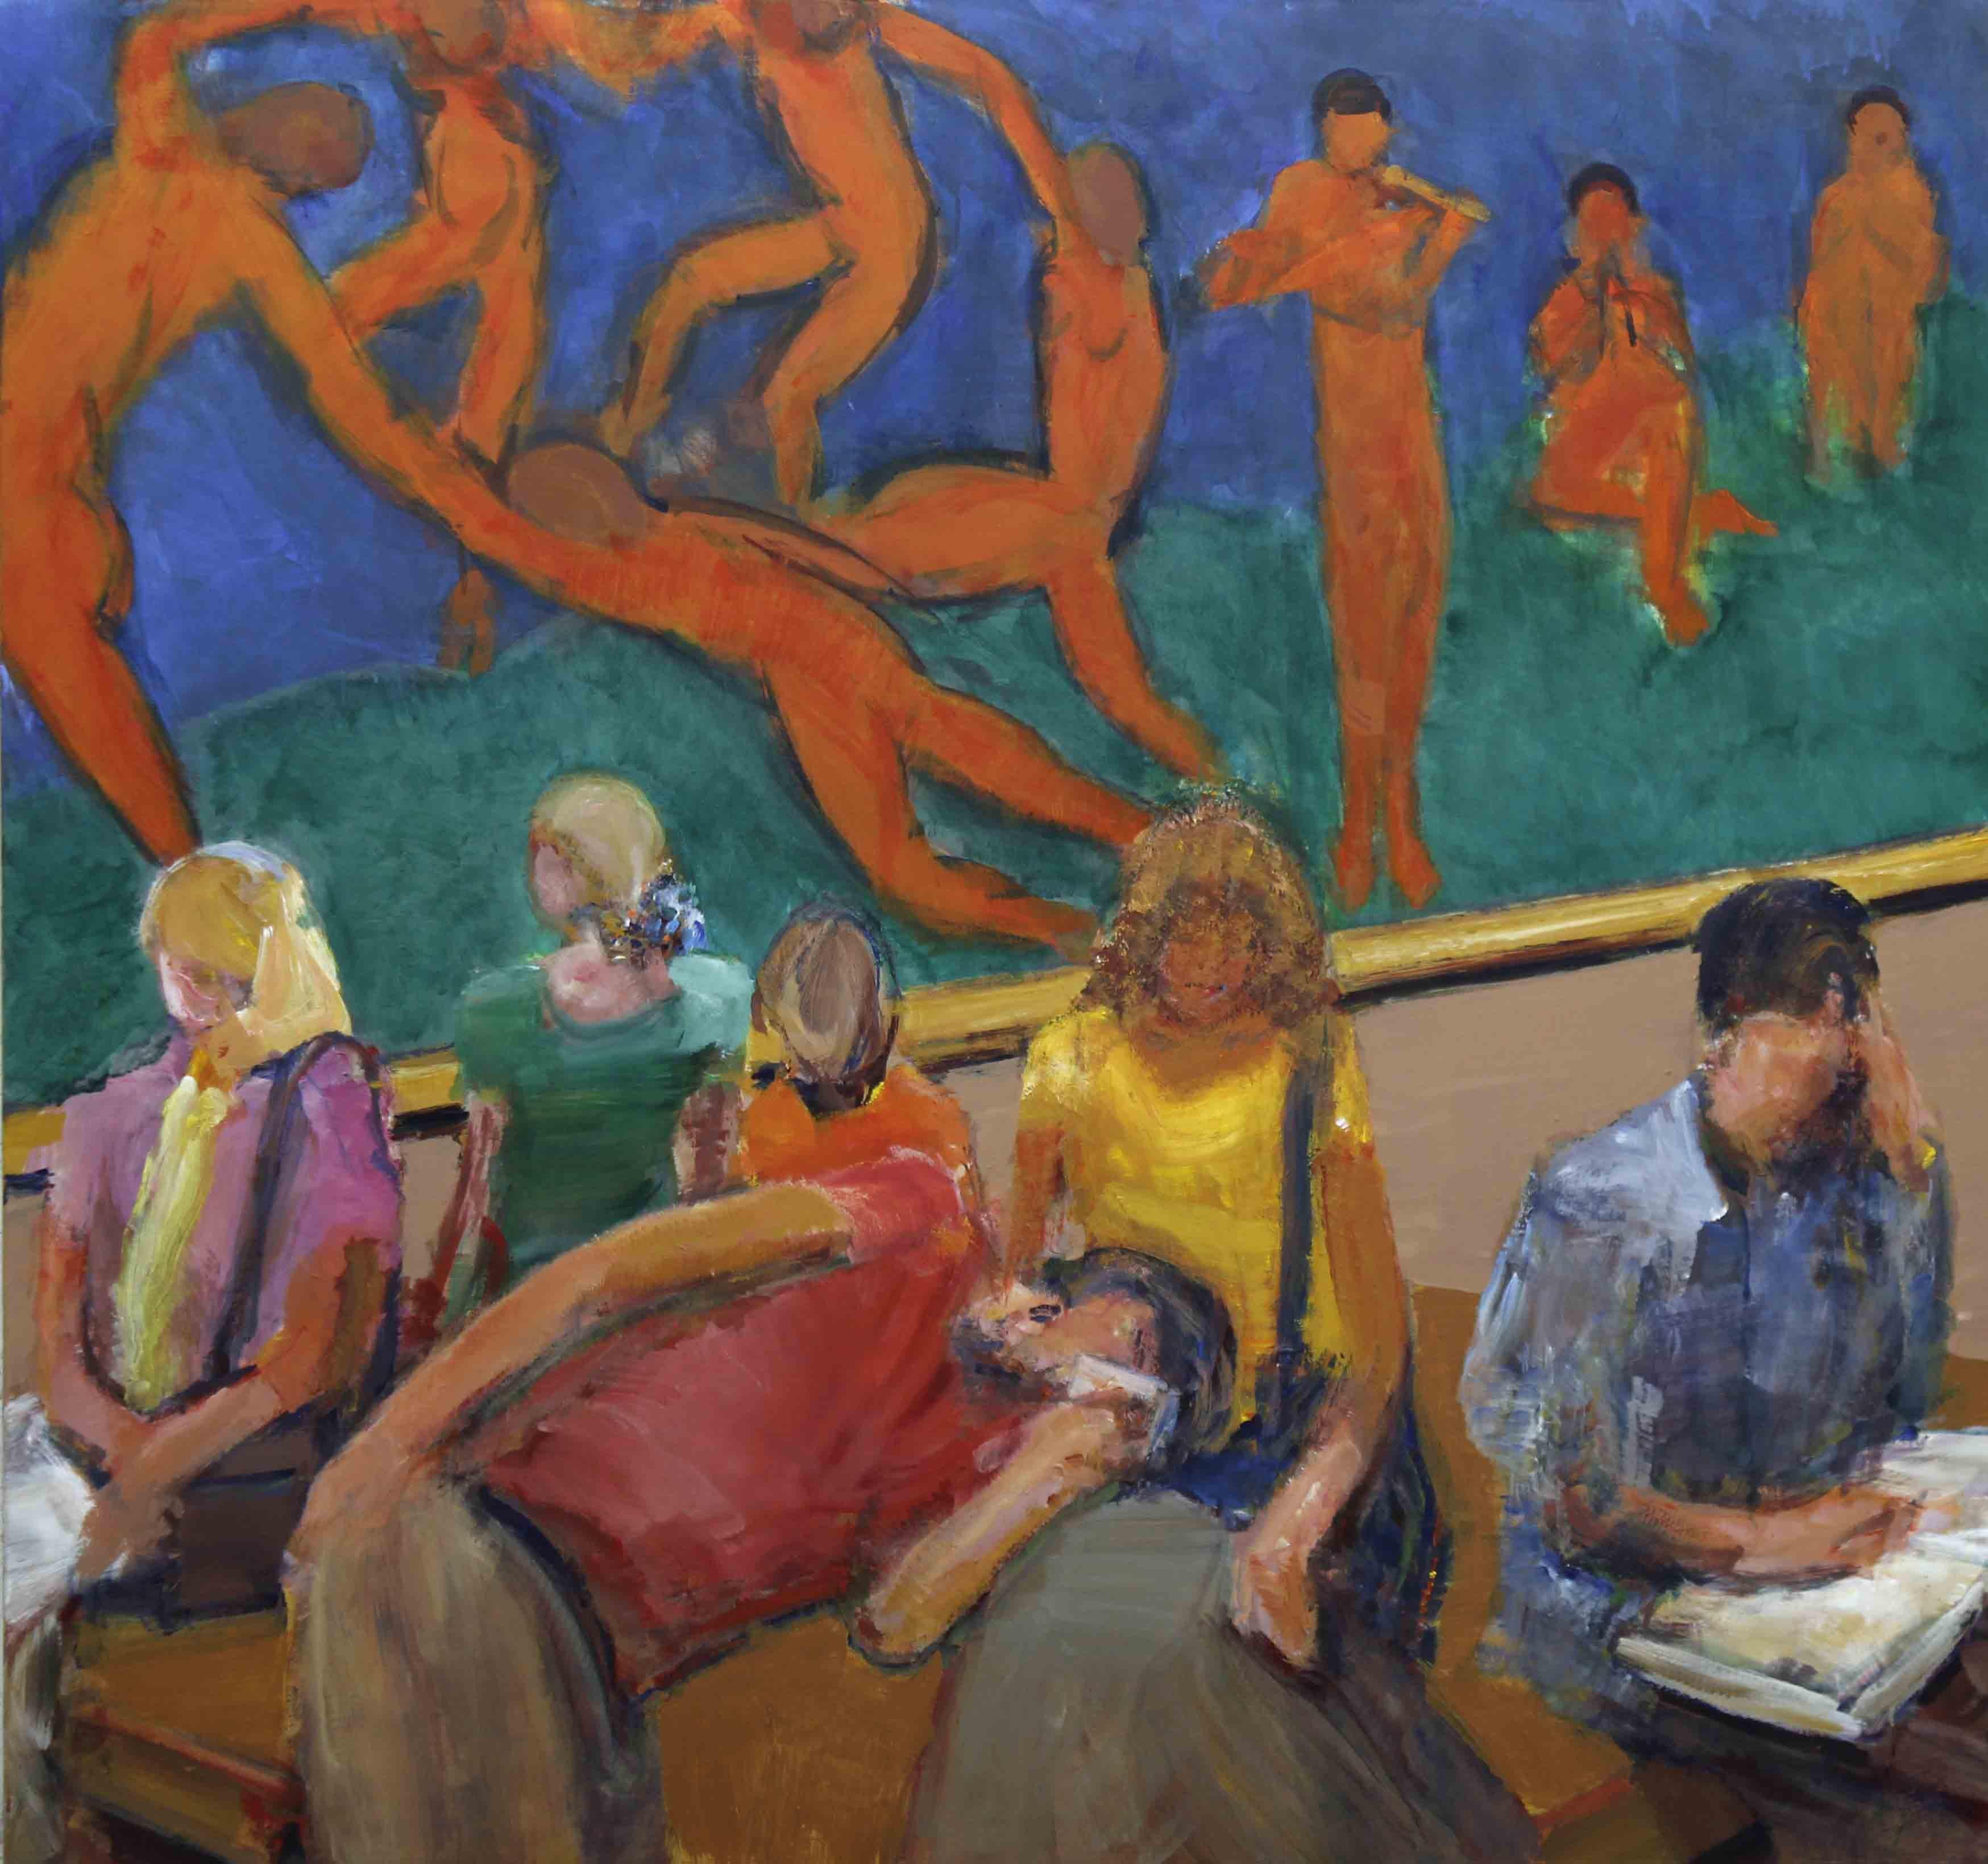 HERMITAGE II, people sitting in museum, paintings on the wall, oil paint - Painting by Simon Nicholas